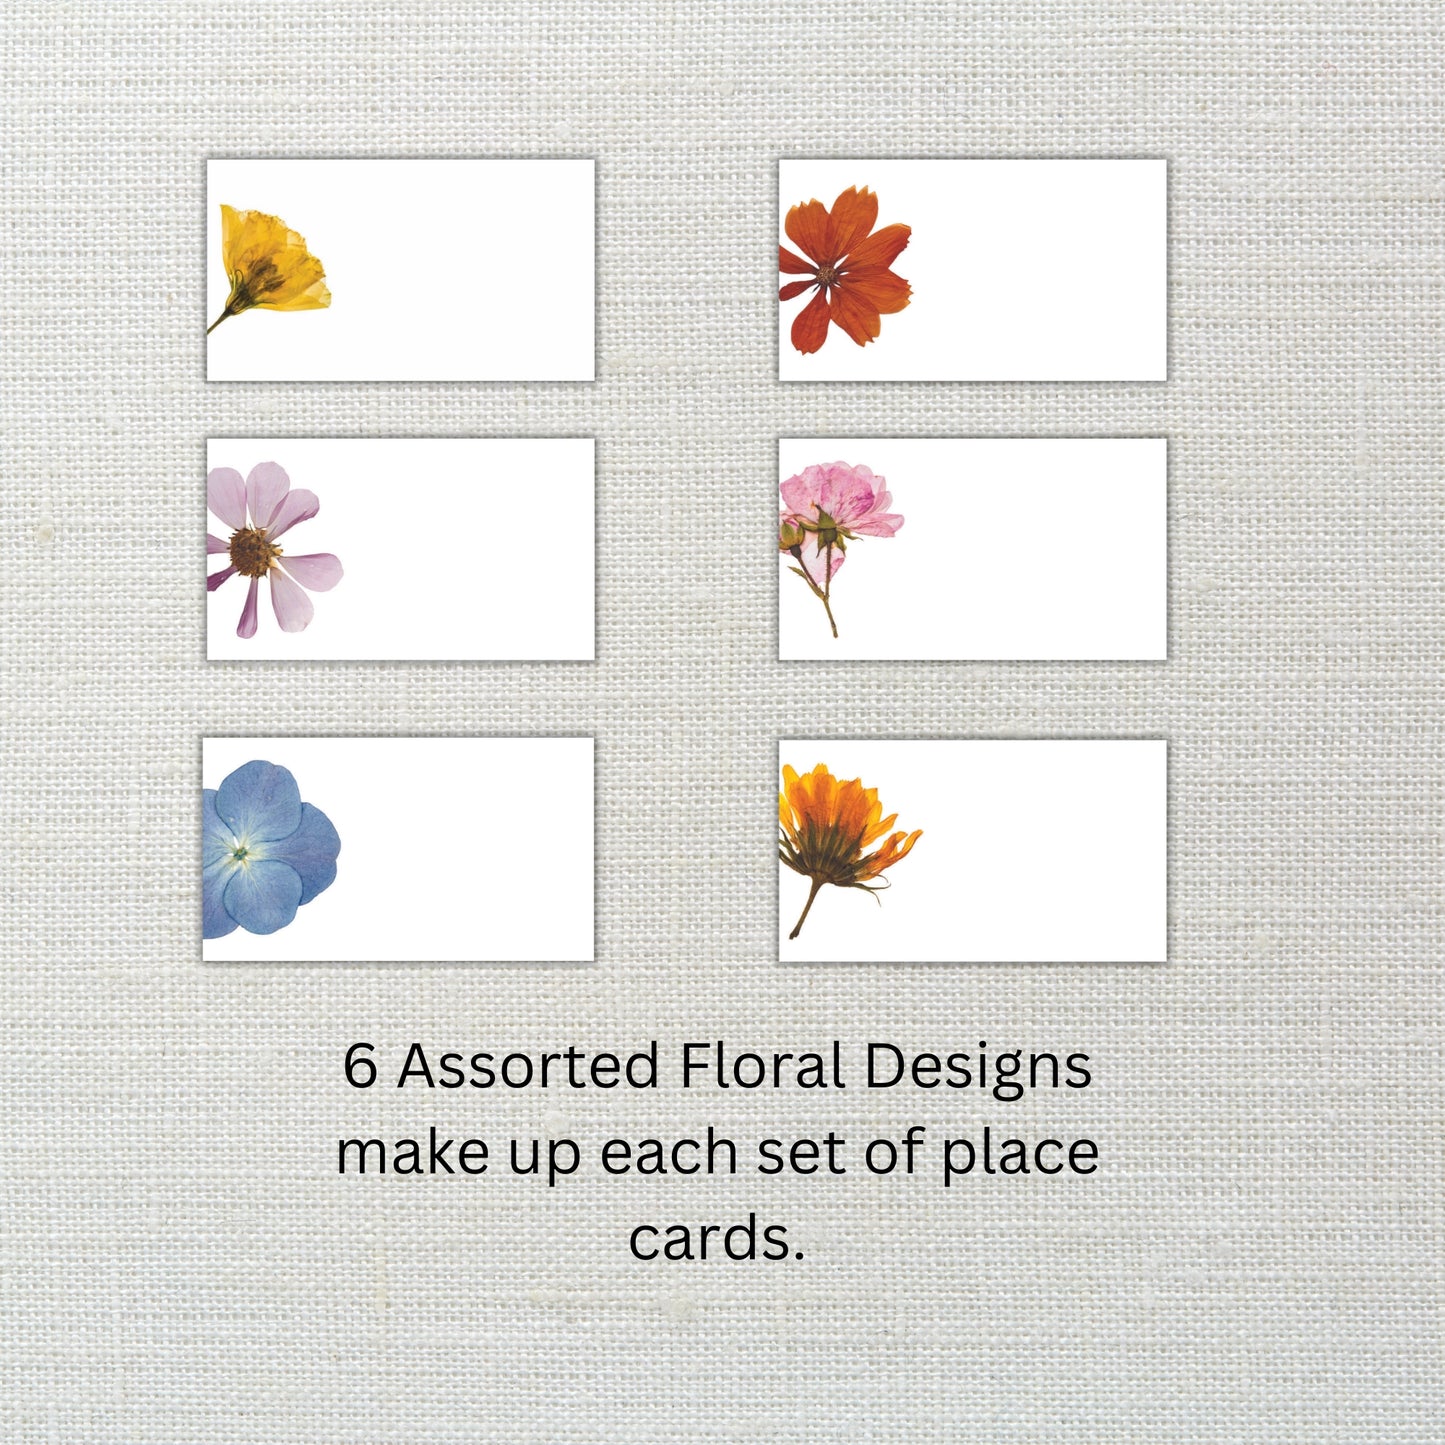 Place Cards with Pressed Flower Illustrations for Weddings, Showers, and Dinner Parties, Set of 30